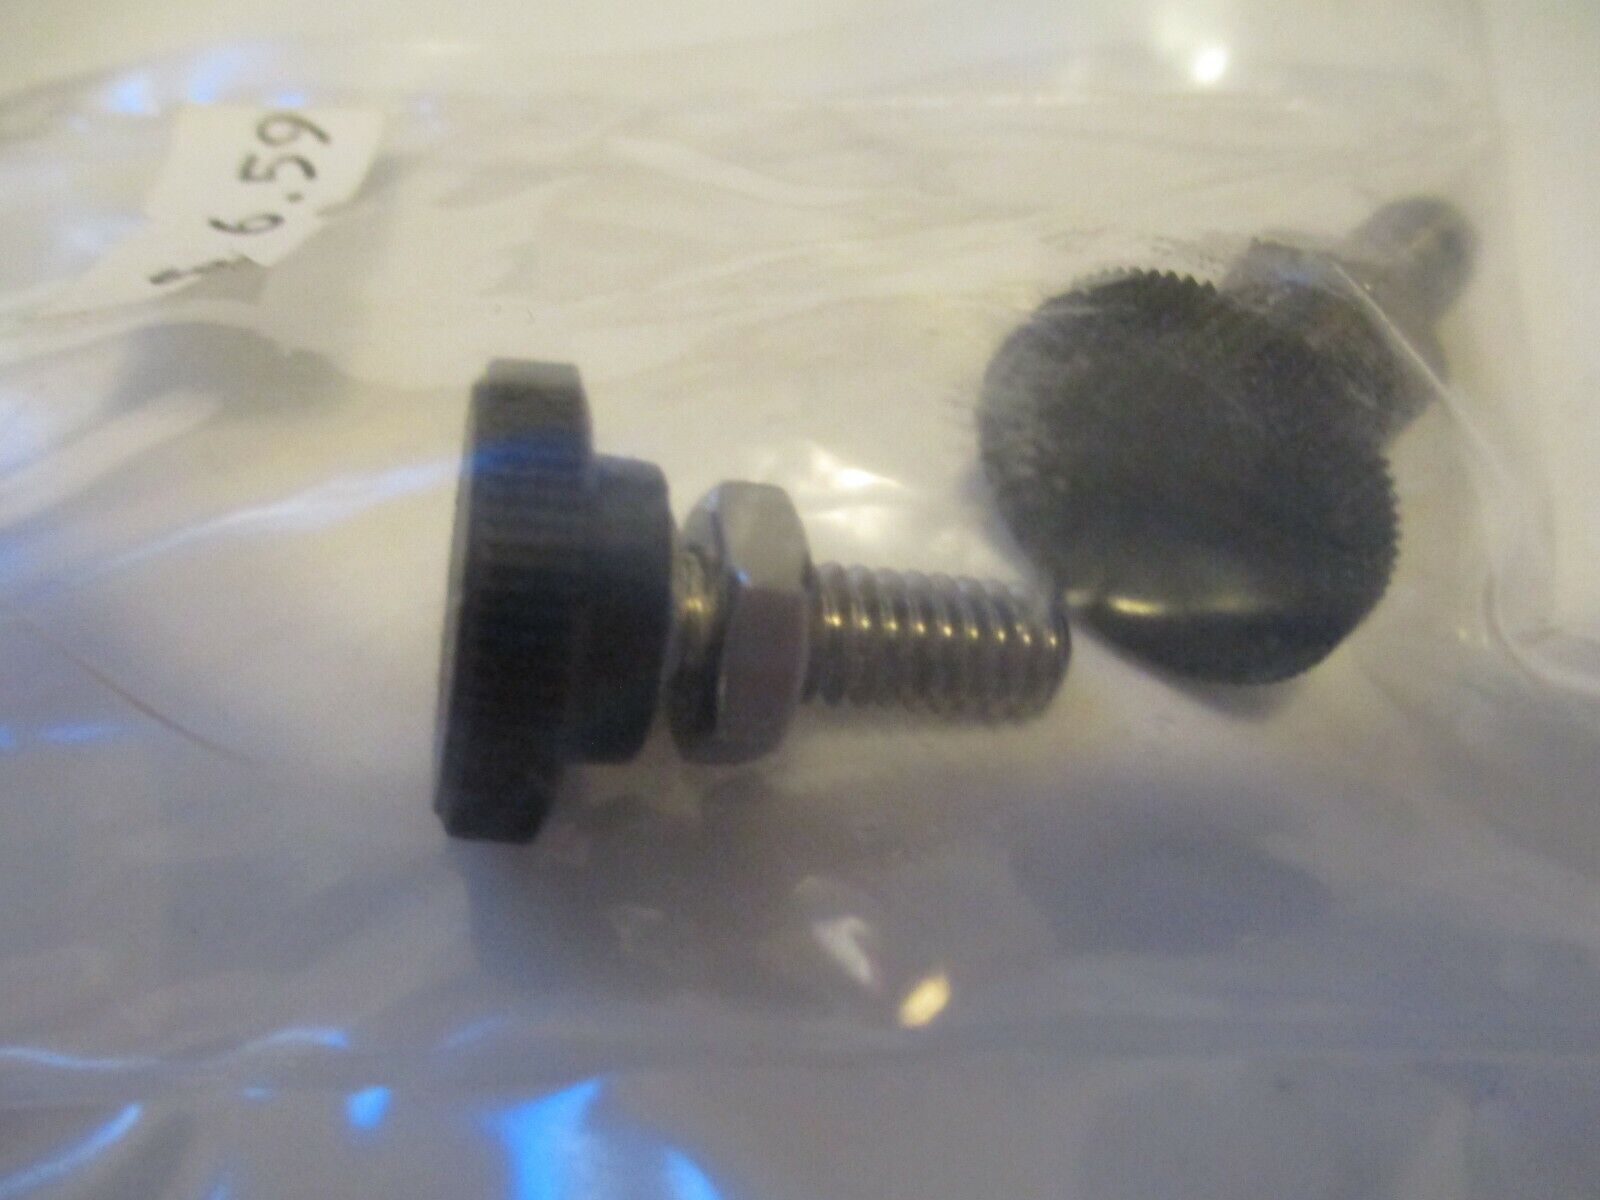 Cannon Downrigger thumb screws 2 pack (item 2473) Cannon unknown